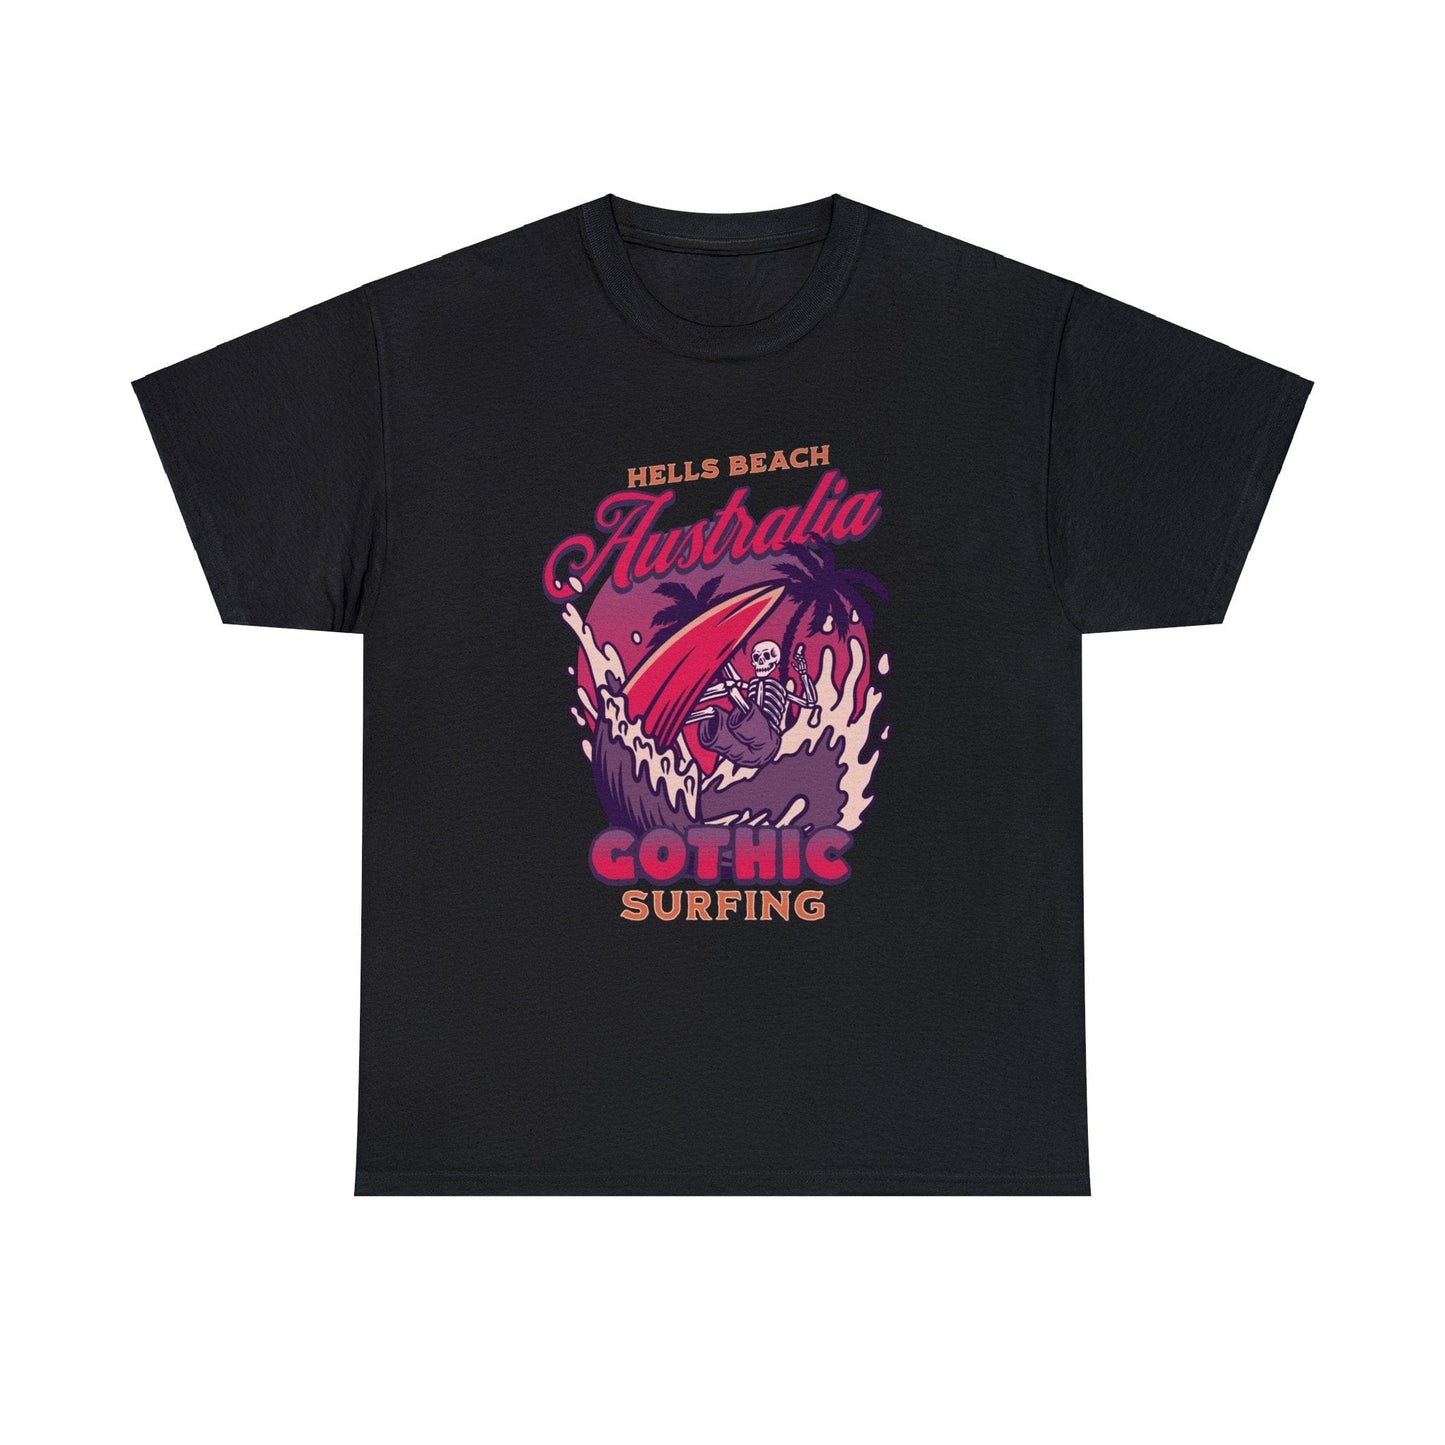 women's Hells Beach Australia Gothic Surfing black Gildan 5000 t-shirt in reds, purples, halloween oranges featuring a board short wearing skeleton catching a wave under a full moon, laid out t-shirt